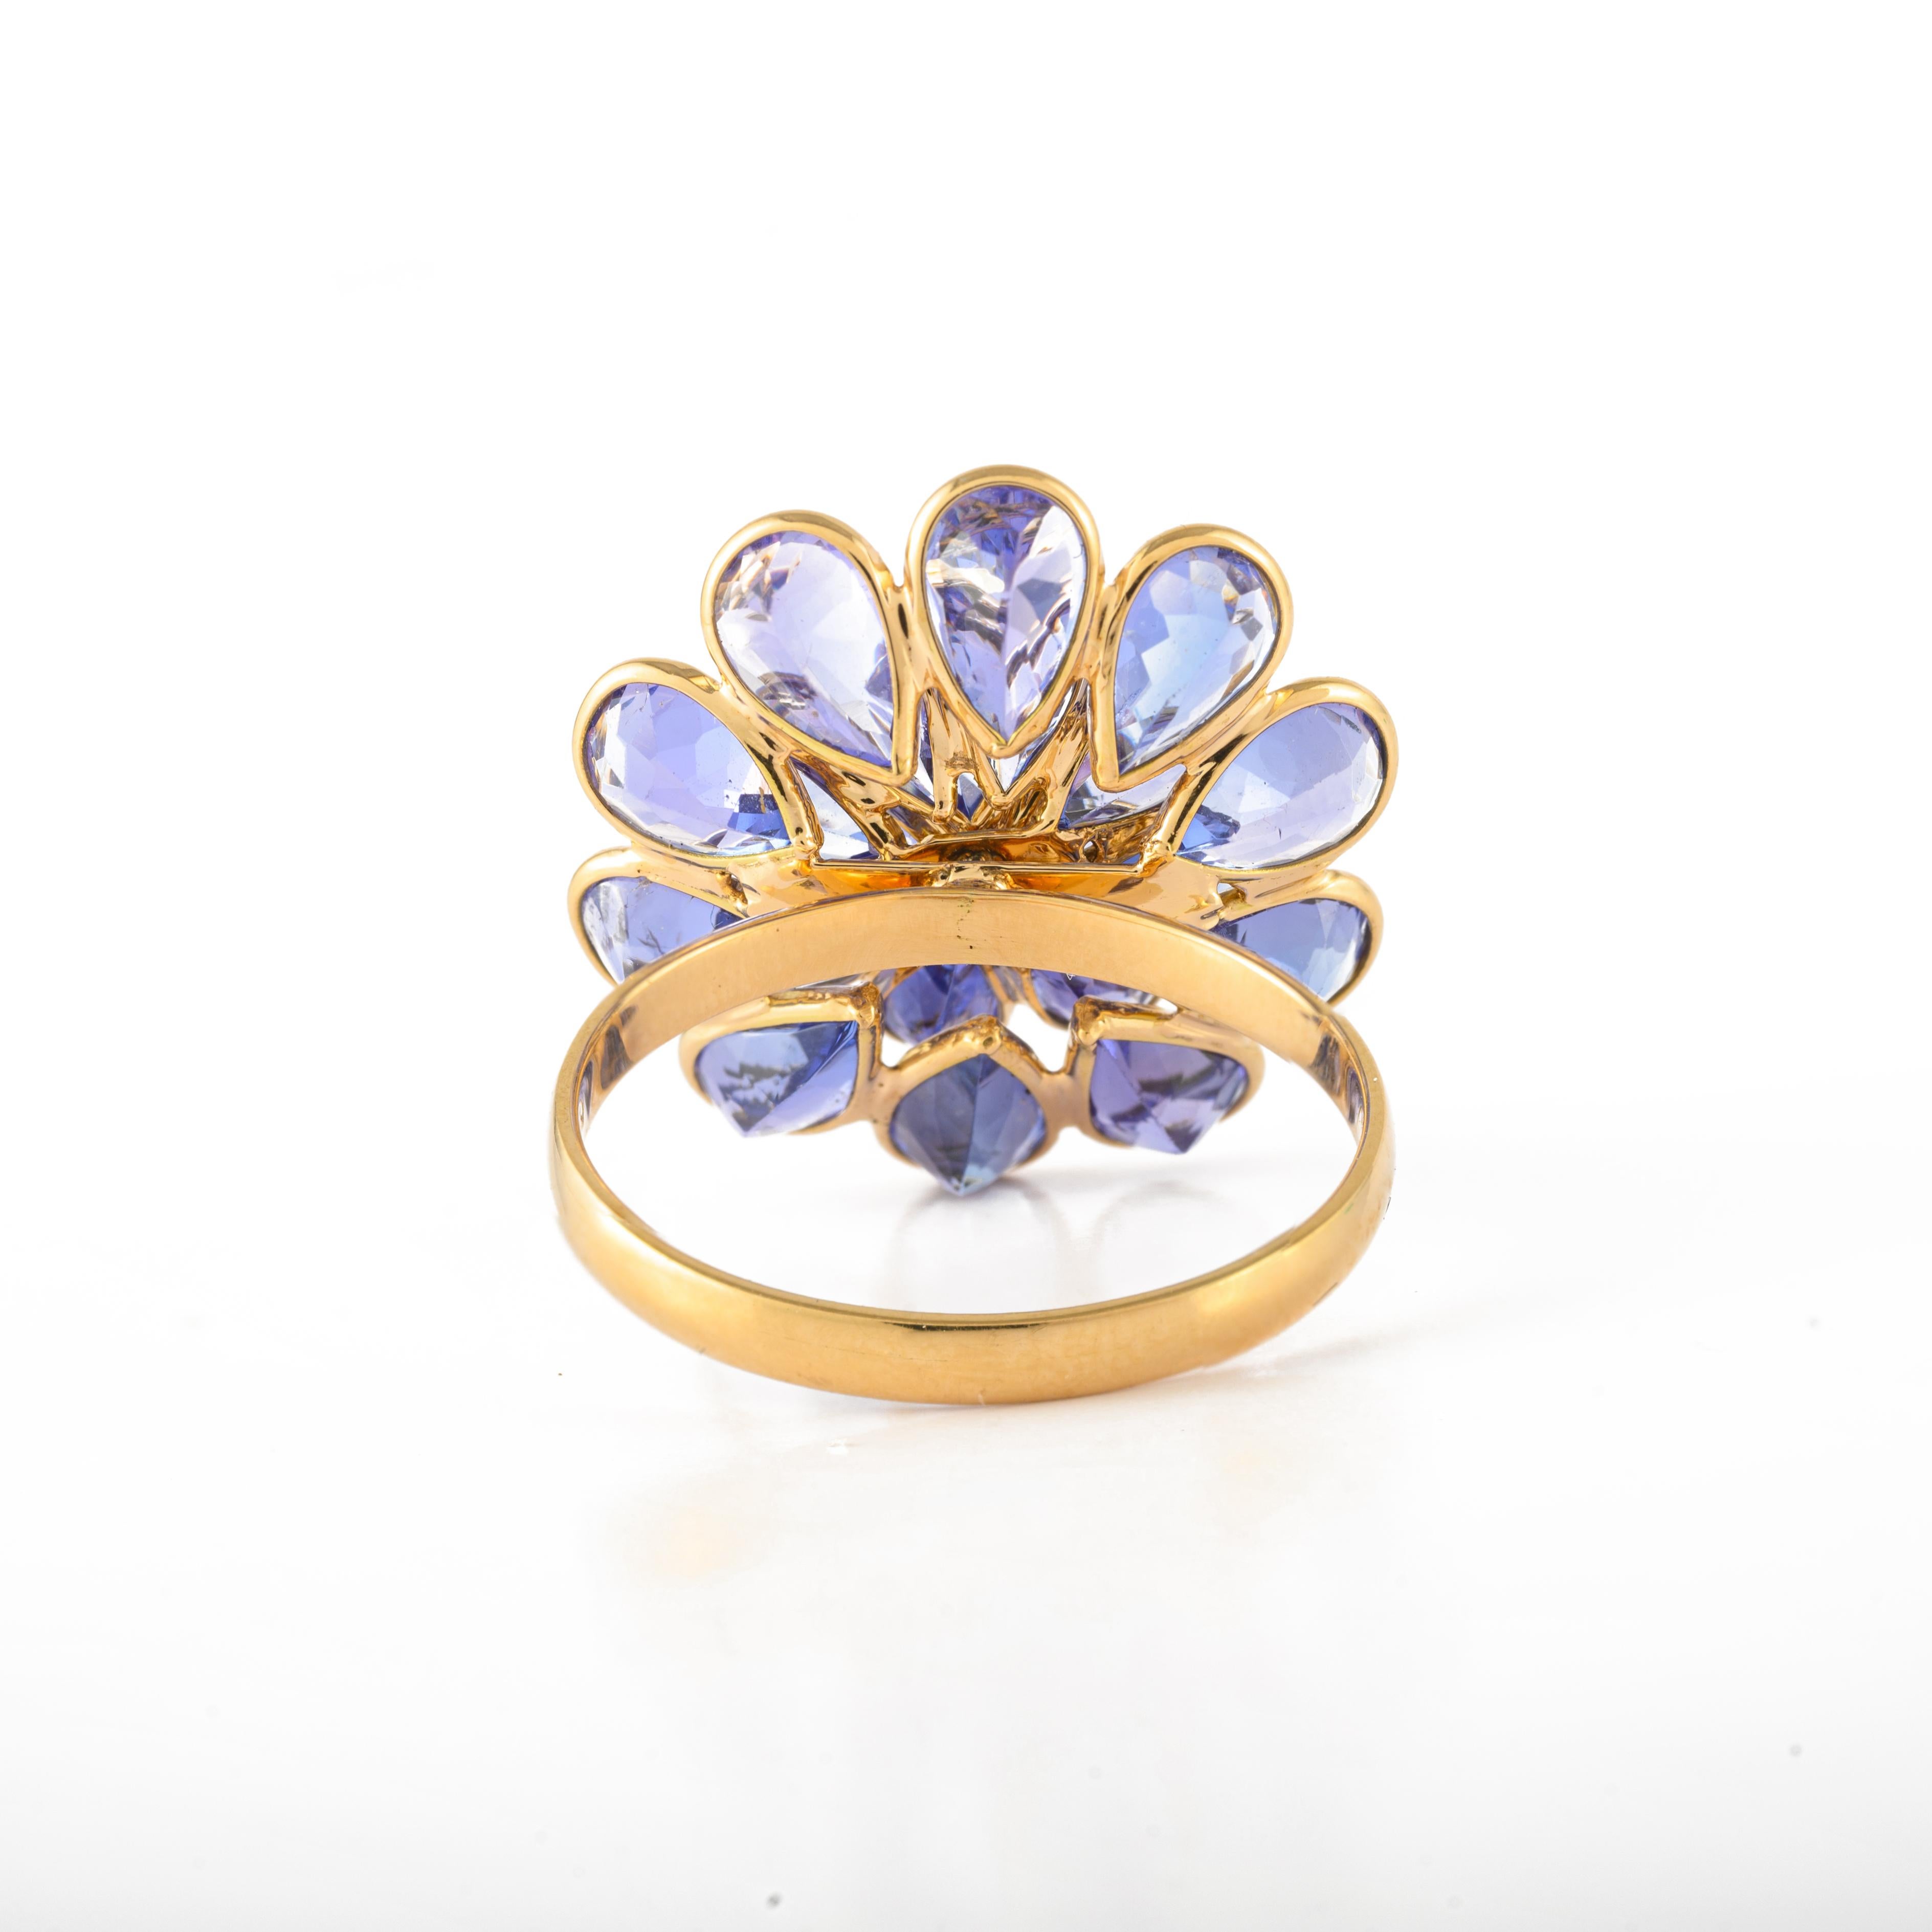 For Sale:  6.26ct Tanzanite Flower Ring with Diamond in 18k Solid Yellow Gold 5